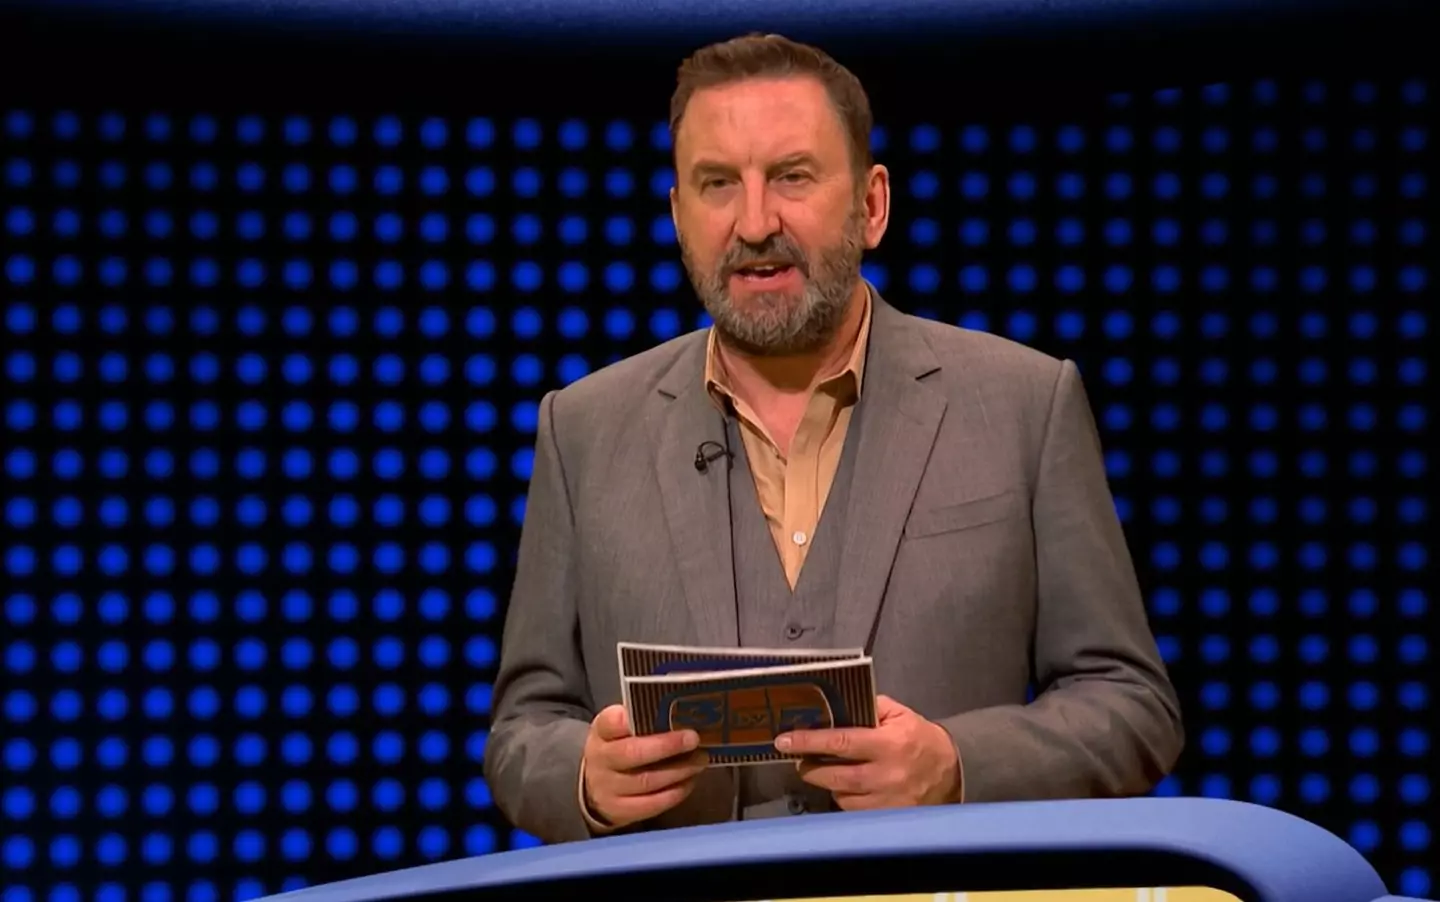 Thursday night viewers got to see Lee Mack in new quiz show 3 by 3.